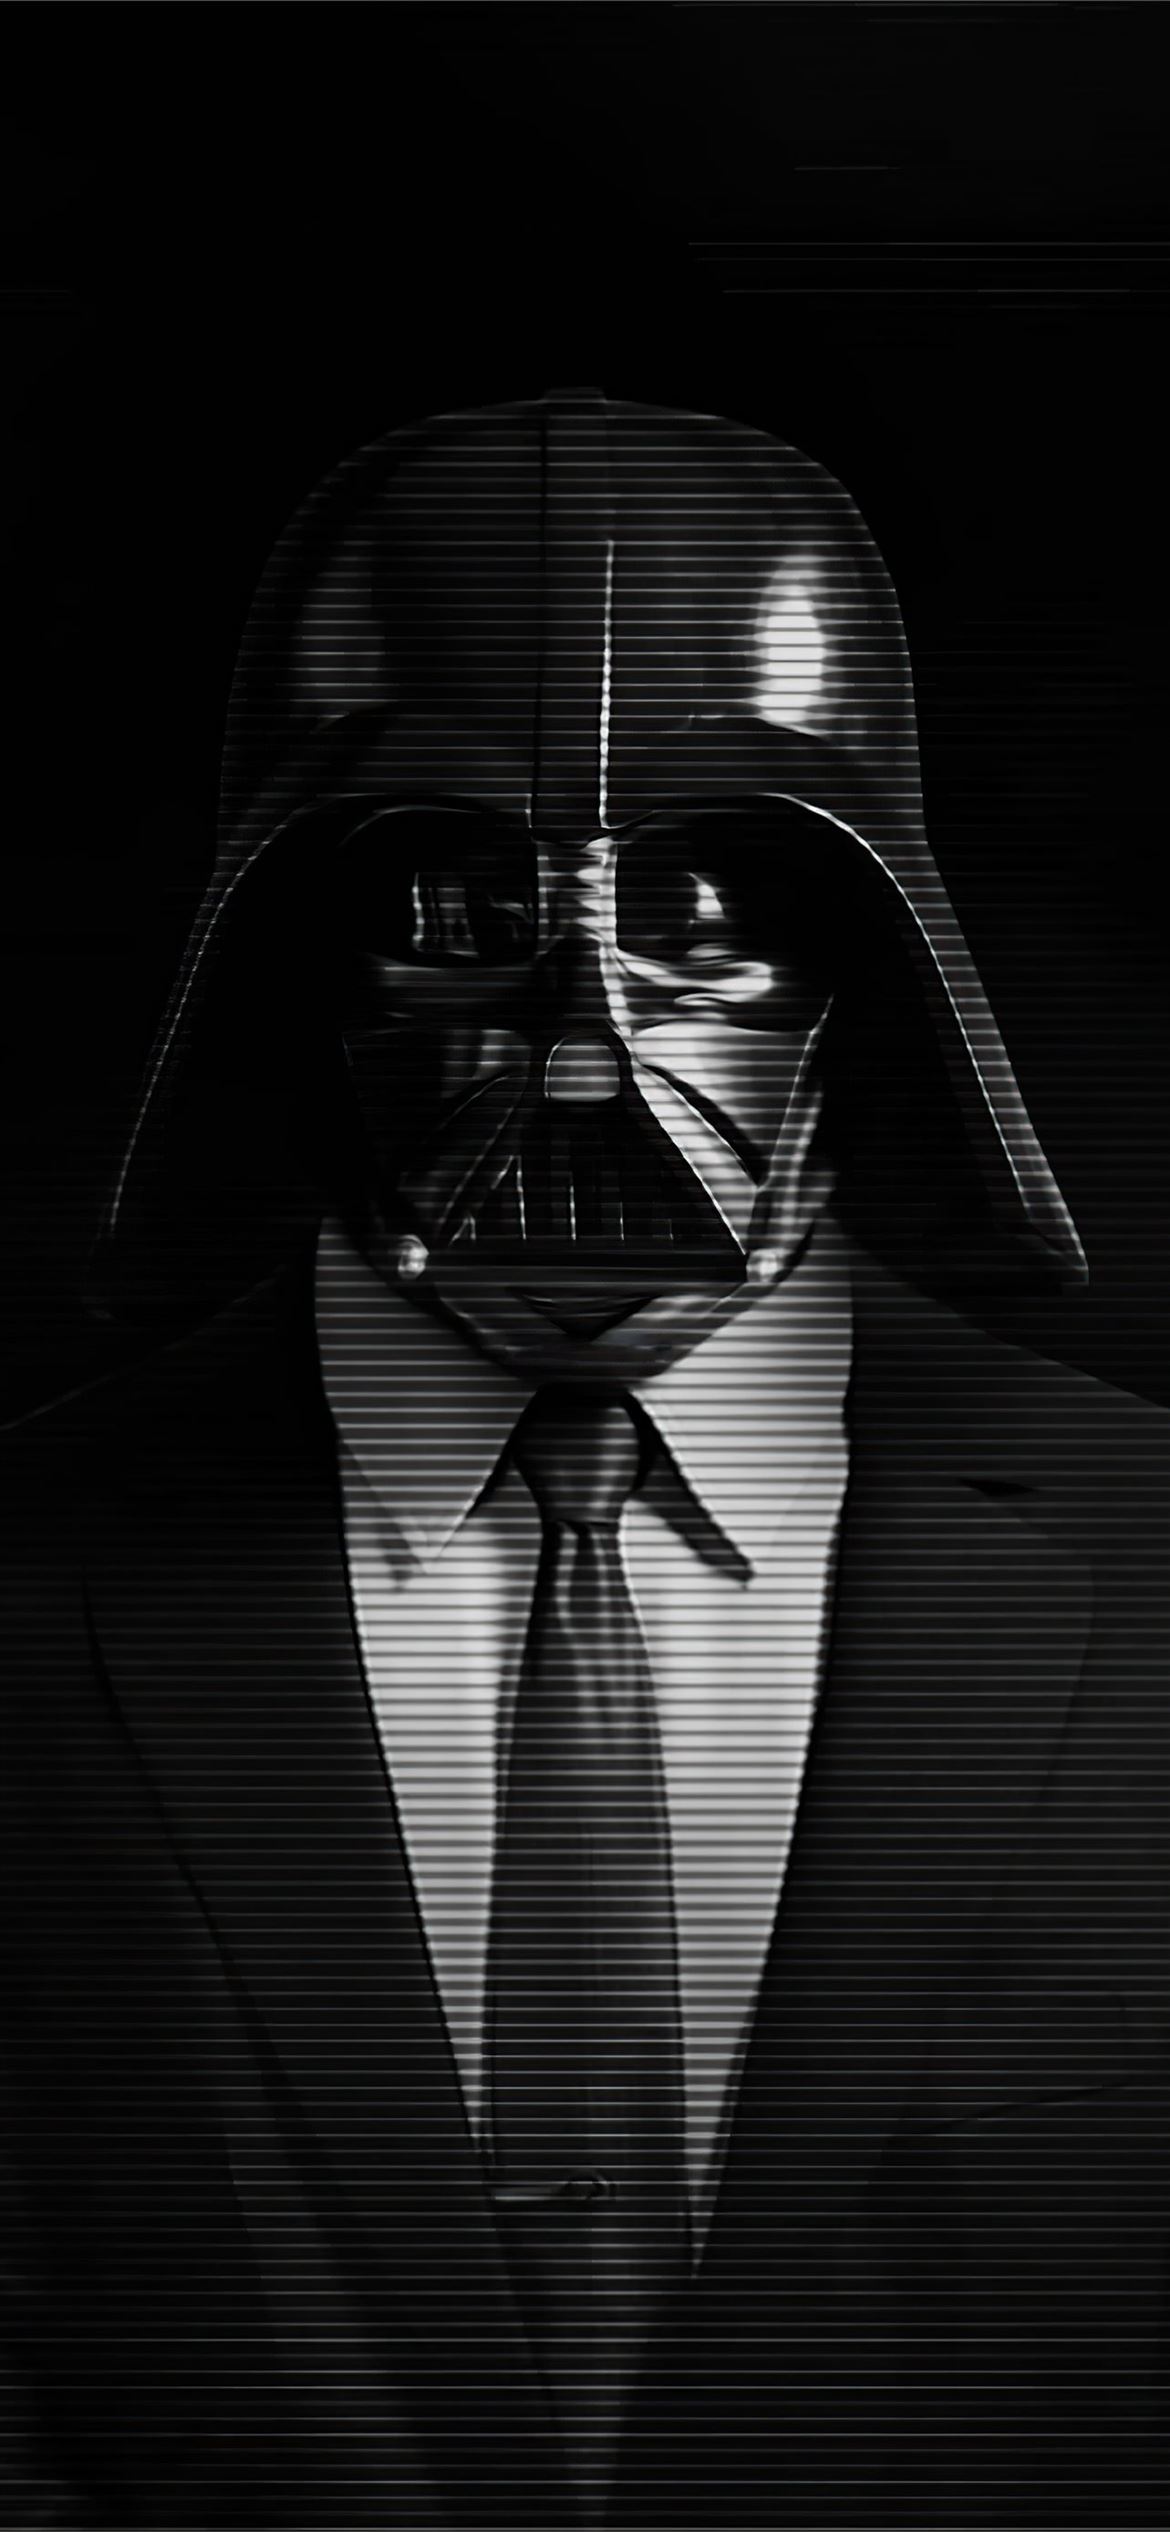 Mobile wallpaper Star Wars Sci Fi Darth Vader Sith Star Wars 1173513  download the picture for free